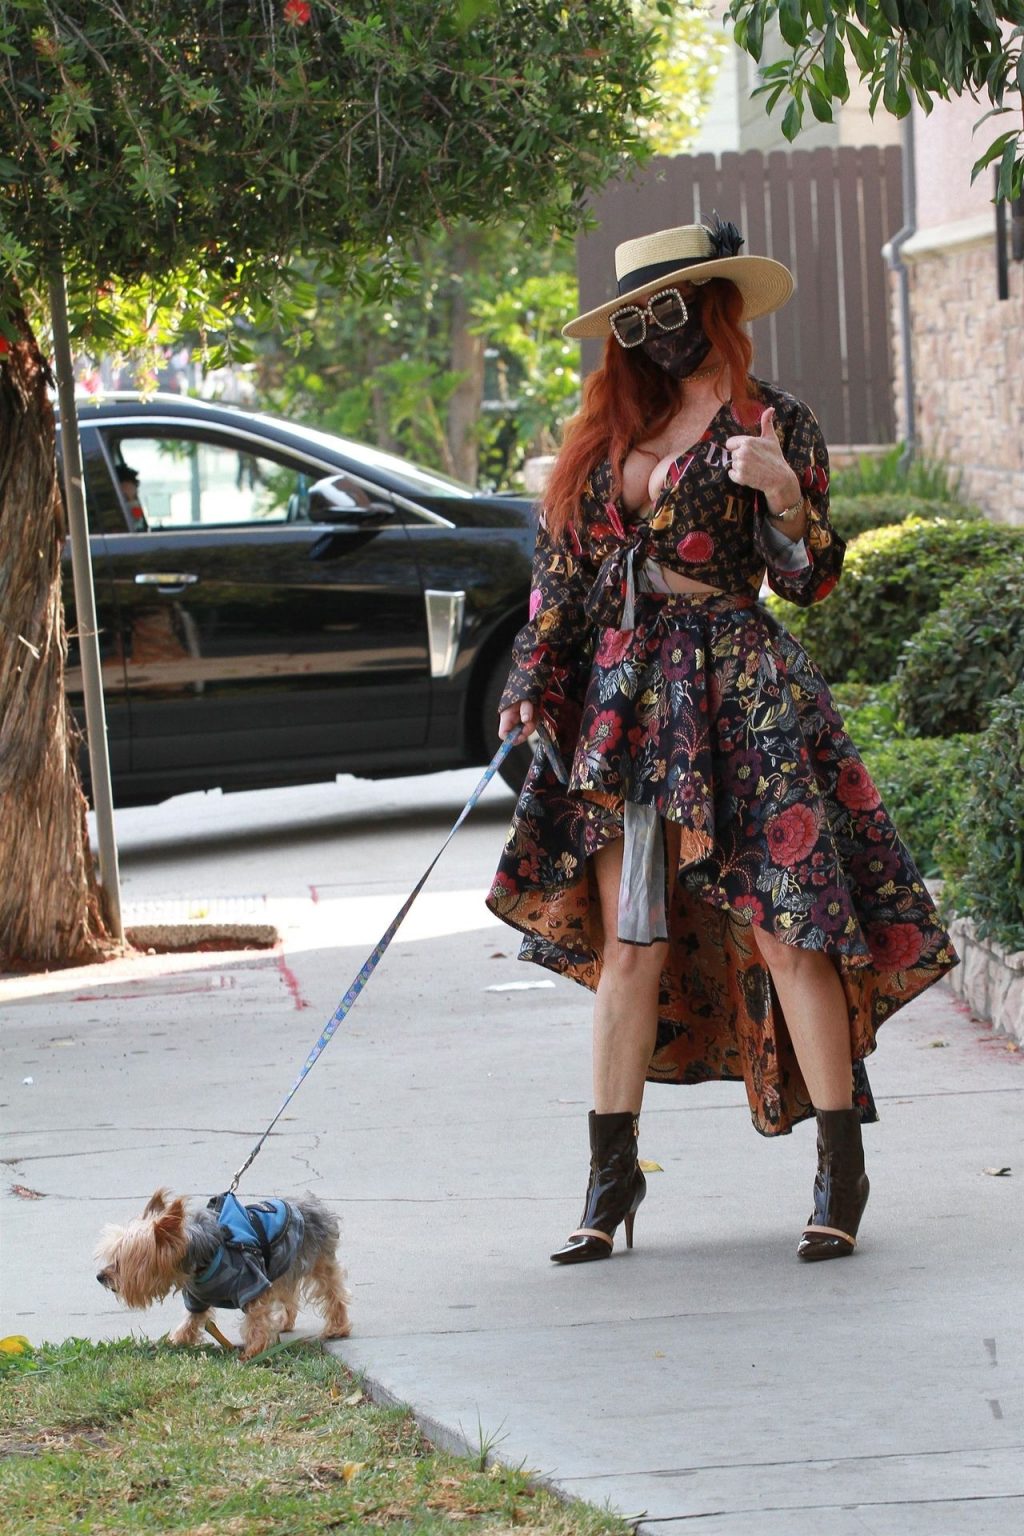 Phoebe Price Shows Off Her Assets Walking Her Dog (22 Photos)